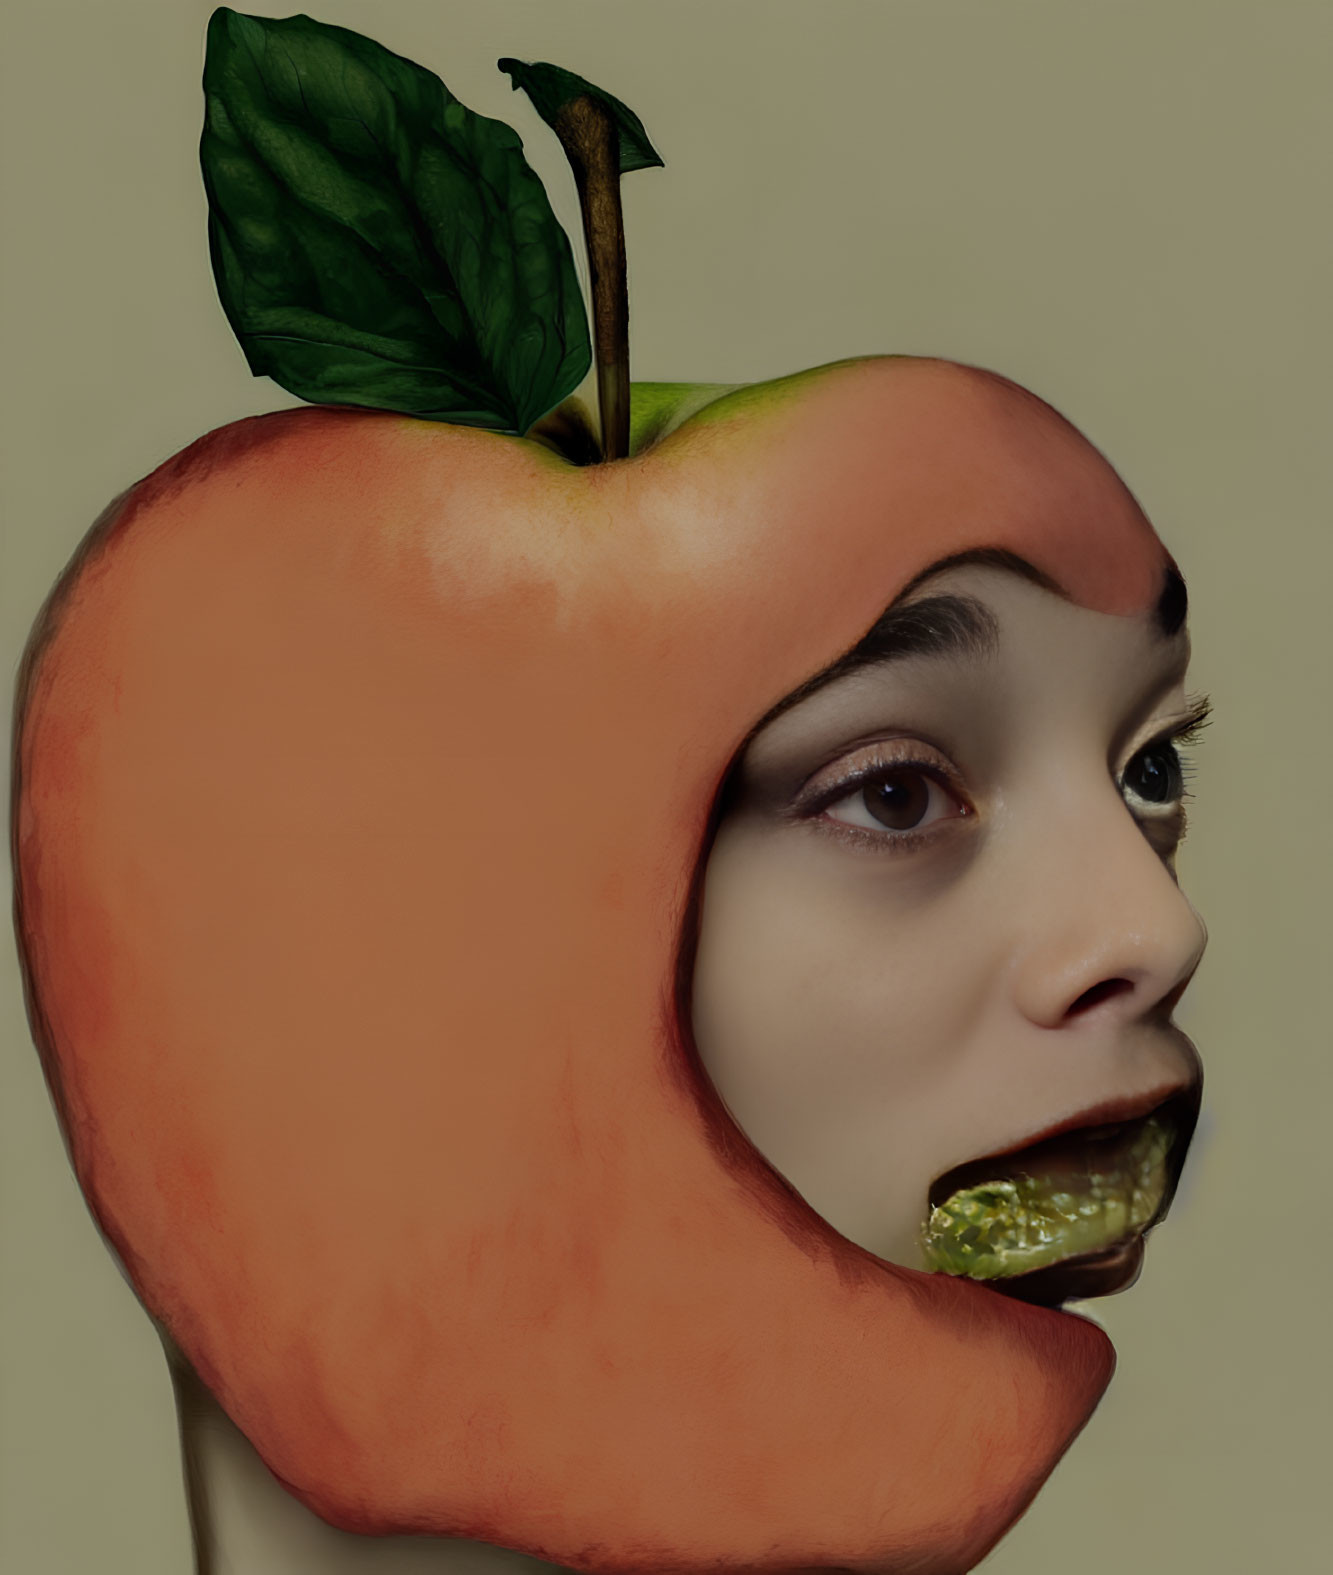 Surreal image: person's face merges with apple skin and leaf